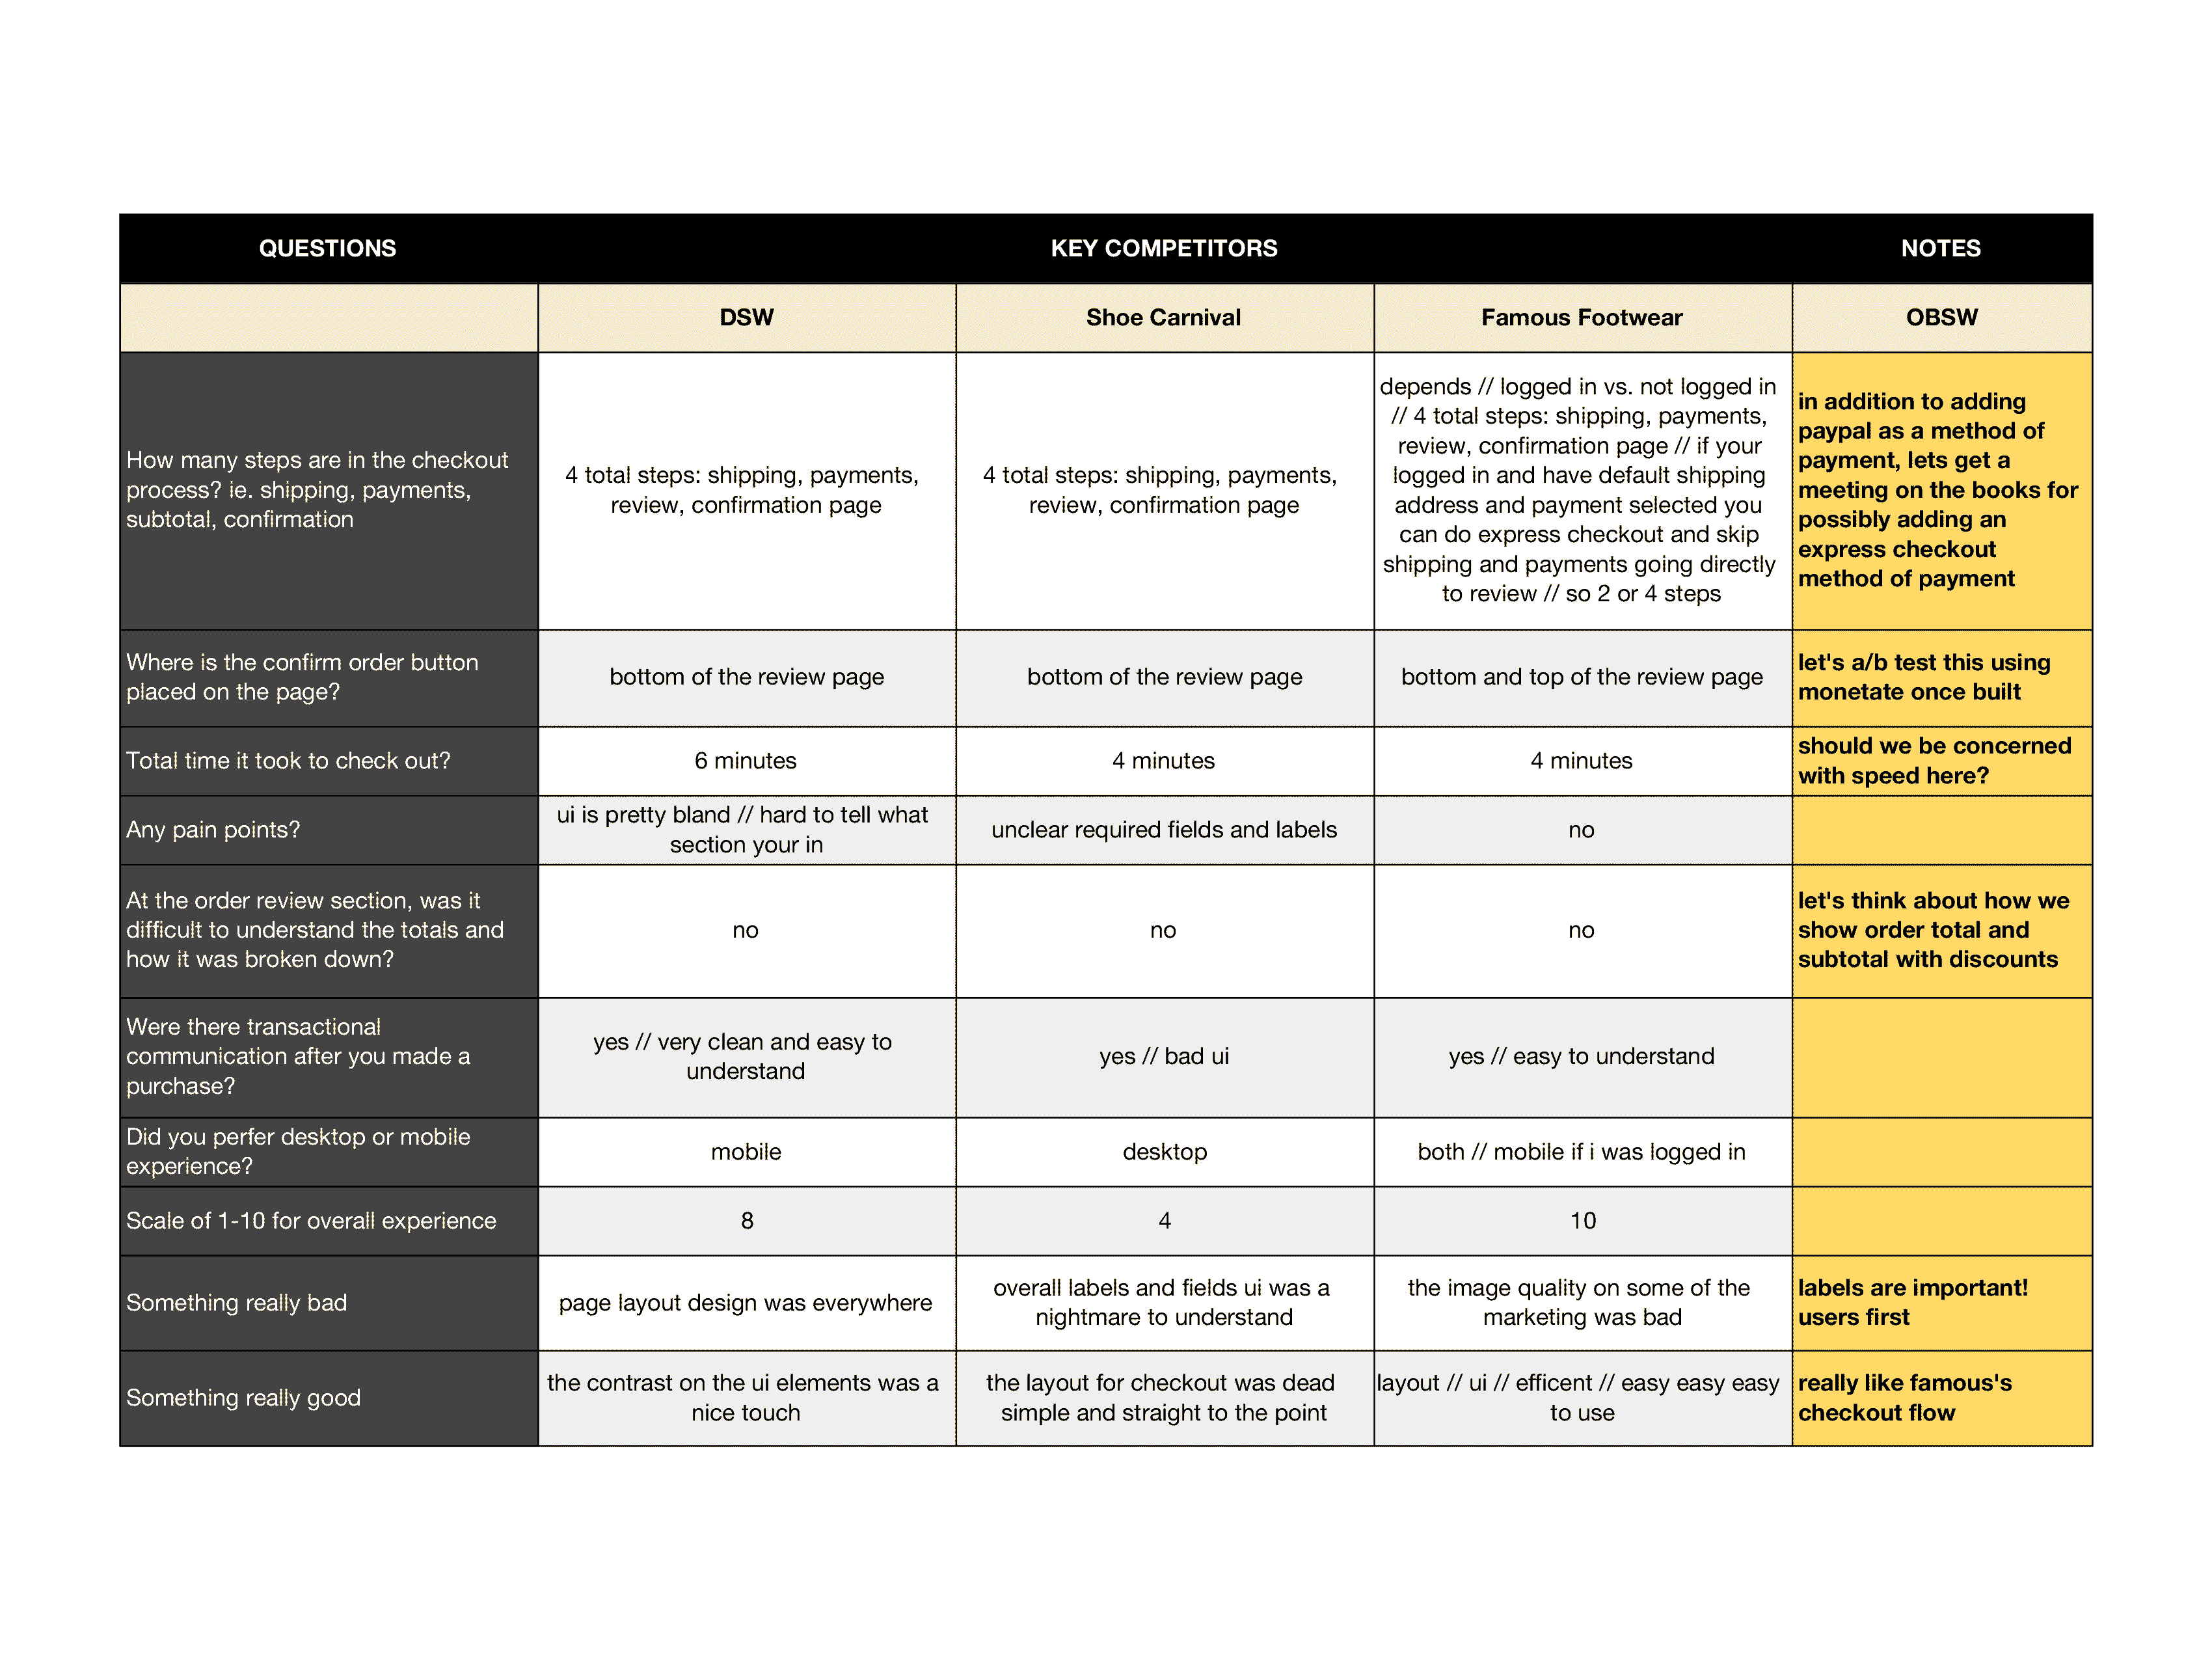 a screenshot of some question and answers comparing other websites checkout process to each other, and some notes about certain take aways